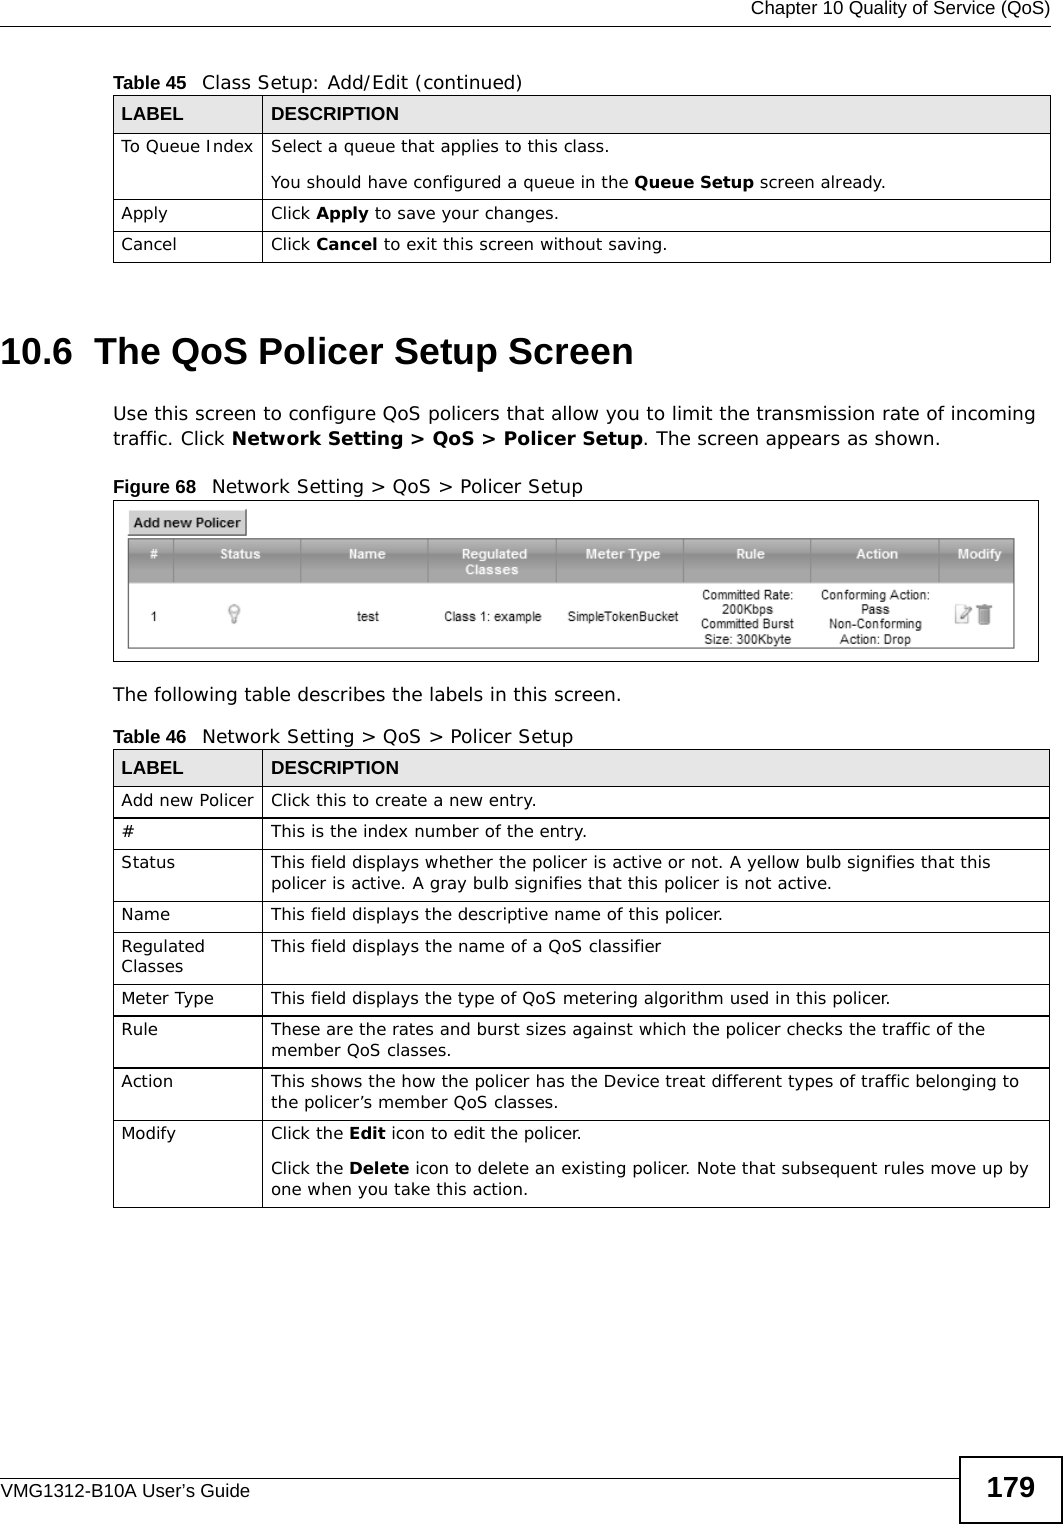  Chapter 10 Quality of Service (QoS)VMG1312-B10A User’s Guide 17910.6  The QoS Policer Setup ScreenUse this screen to configure QoS policers that allow you to limit the transmission rate of incoming traffic. Click Network Setting &gt; QoS &gt; Policer Setup. The screen appears as shown. Figure 68   Network Setting &gt; QoS &gt; Policer Setup The following table describes the labels in this screen.  To Queue Index Select a queue that applies to this class.You should have configured a queue in the Queue Setup screen already.Apply Click Apply to save your changes.Cancel Click Cancel to exit this screen without saving.Table 45   Class Setup: Add/Edit (continued)LABEL DESCRIPTIONTable 46   Network Setting &gt; QoS &gt; Policer SetupLABEL DESCRIPTIONAdd new Policer Click this to create a new entry.#This is the index number of the entry.Status This field displays whether the policer is active or not. A yellow bulb signifies that this policer is active. A gray bulb signifies that this policer is not active.Name This field displays the descriptive name of this policer.Regulated Classes This field displays the name of a QoS classifierMeter Type This field displays the type of QoS metering algorithm used in this policer.Rule These are the rates and burst sizes against which the policer checks the traffic of the member QoS classes.Action This shows the how the policer has the Device treat different types of traffic belonging to the policer’s member QoS classes.Modify Click the Edit icon to edit the policer.Click the Delete icon to delete an existing policer. Note that subsequent rules move up by one when you take this action.